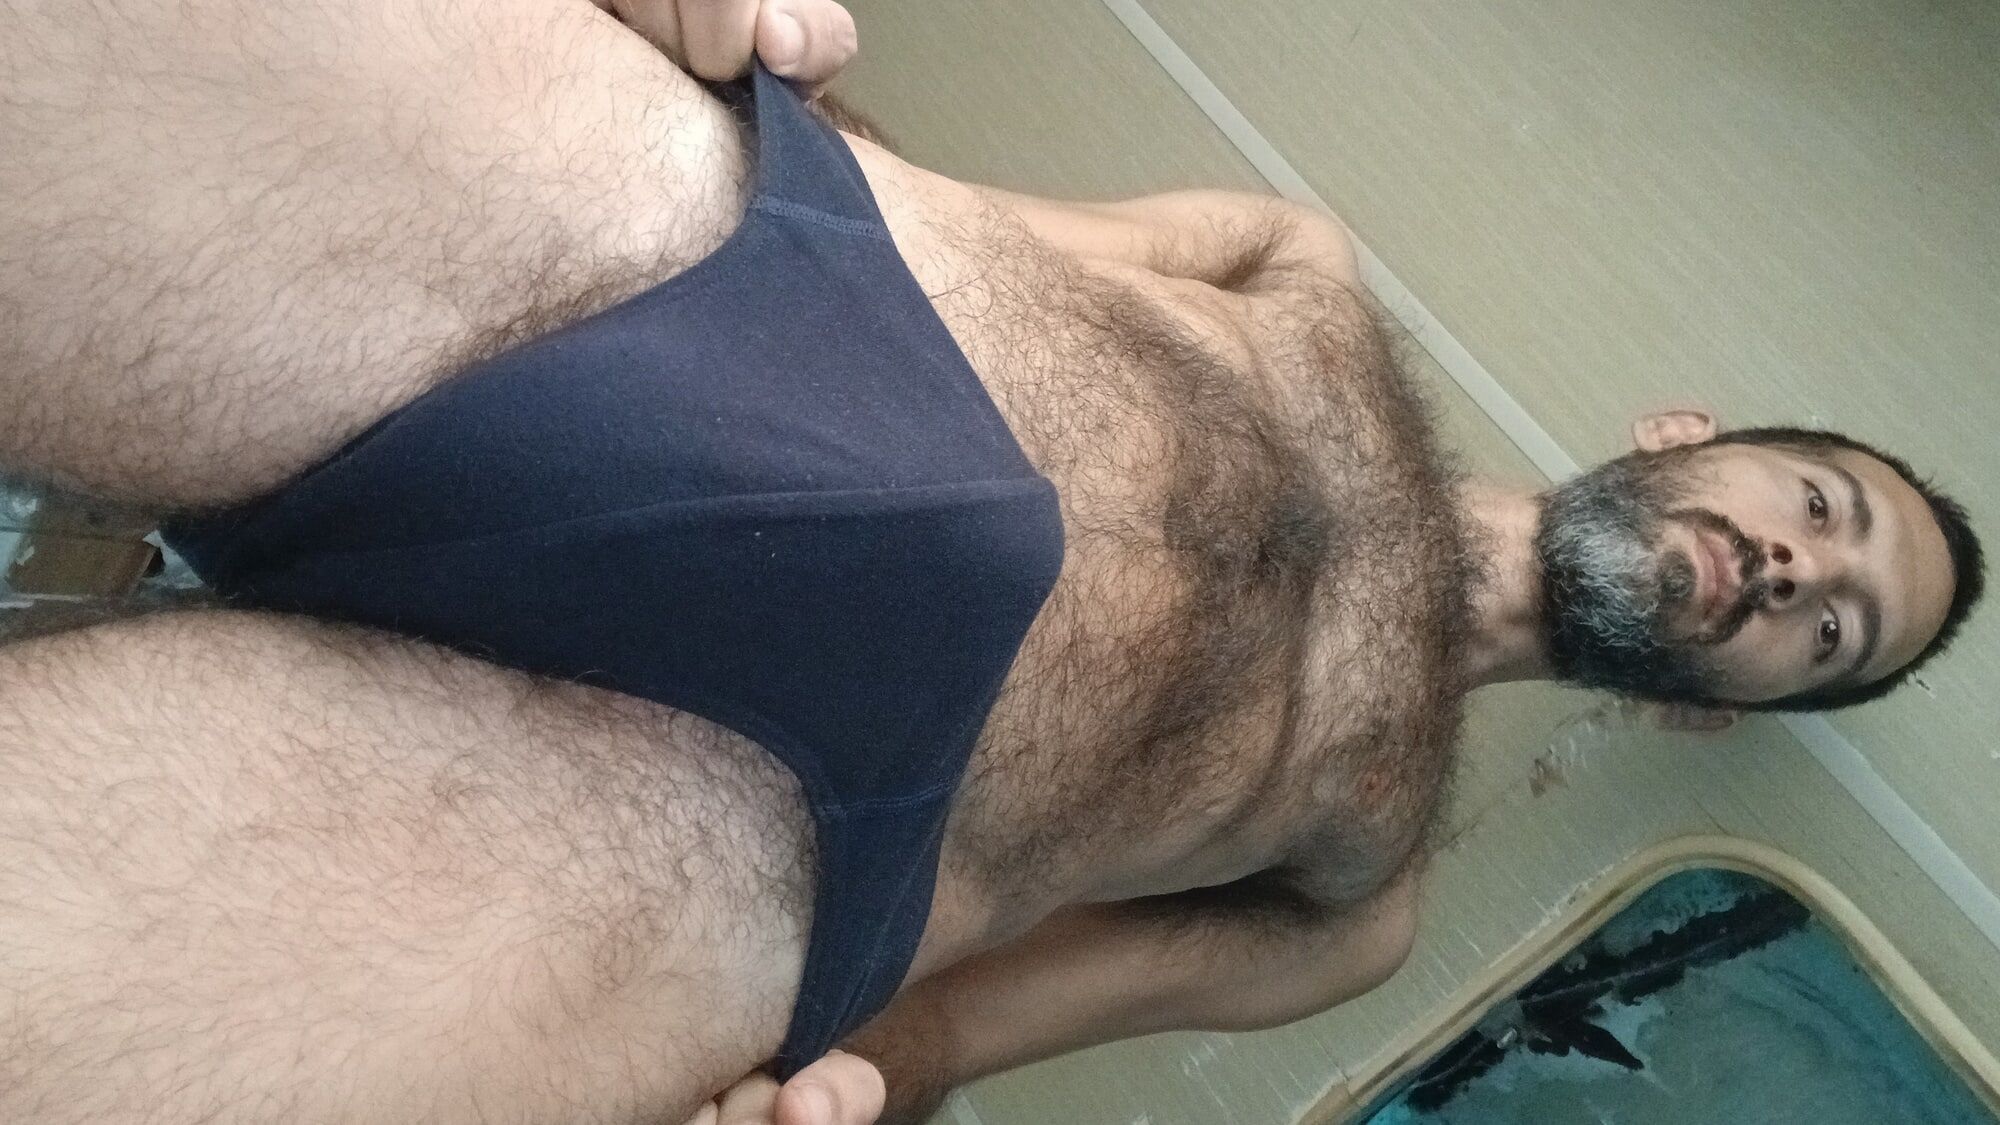 Hard cock in the pants #6